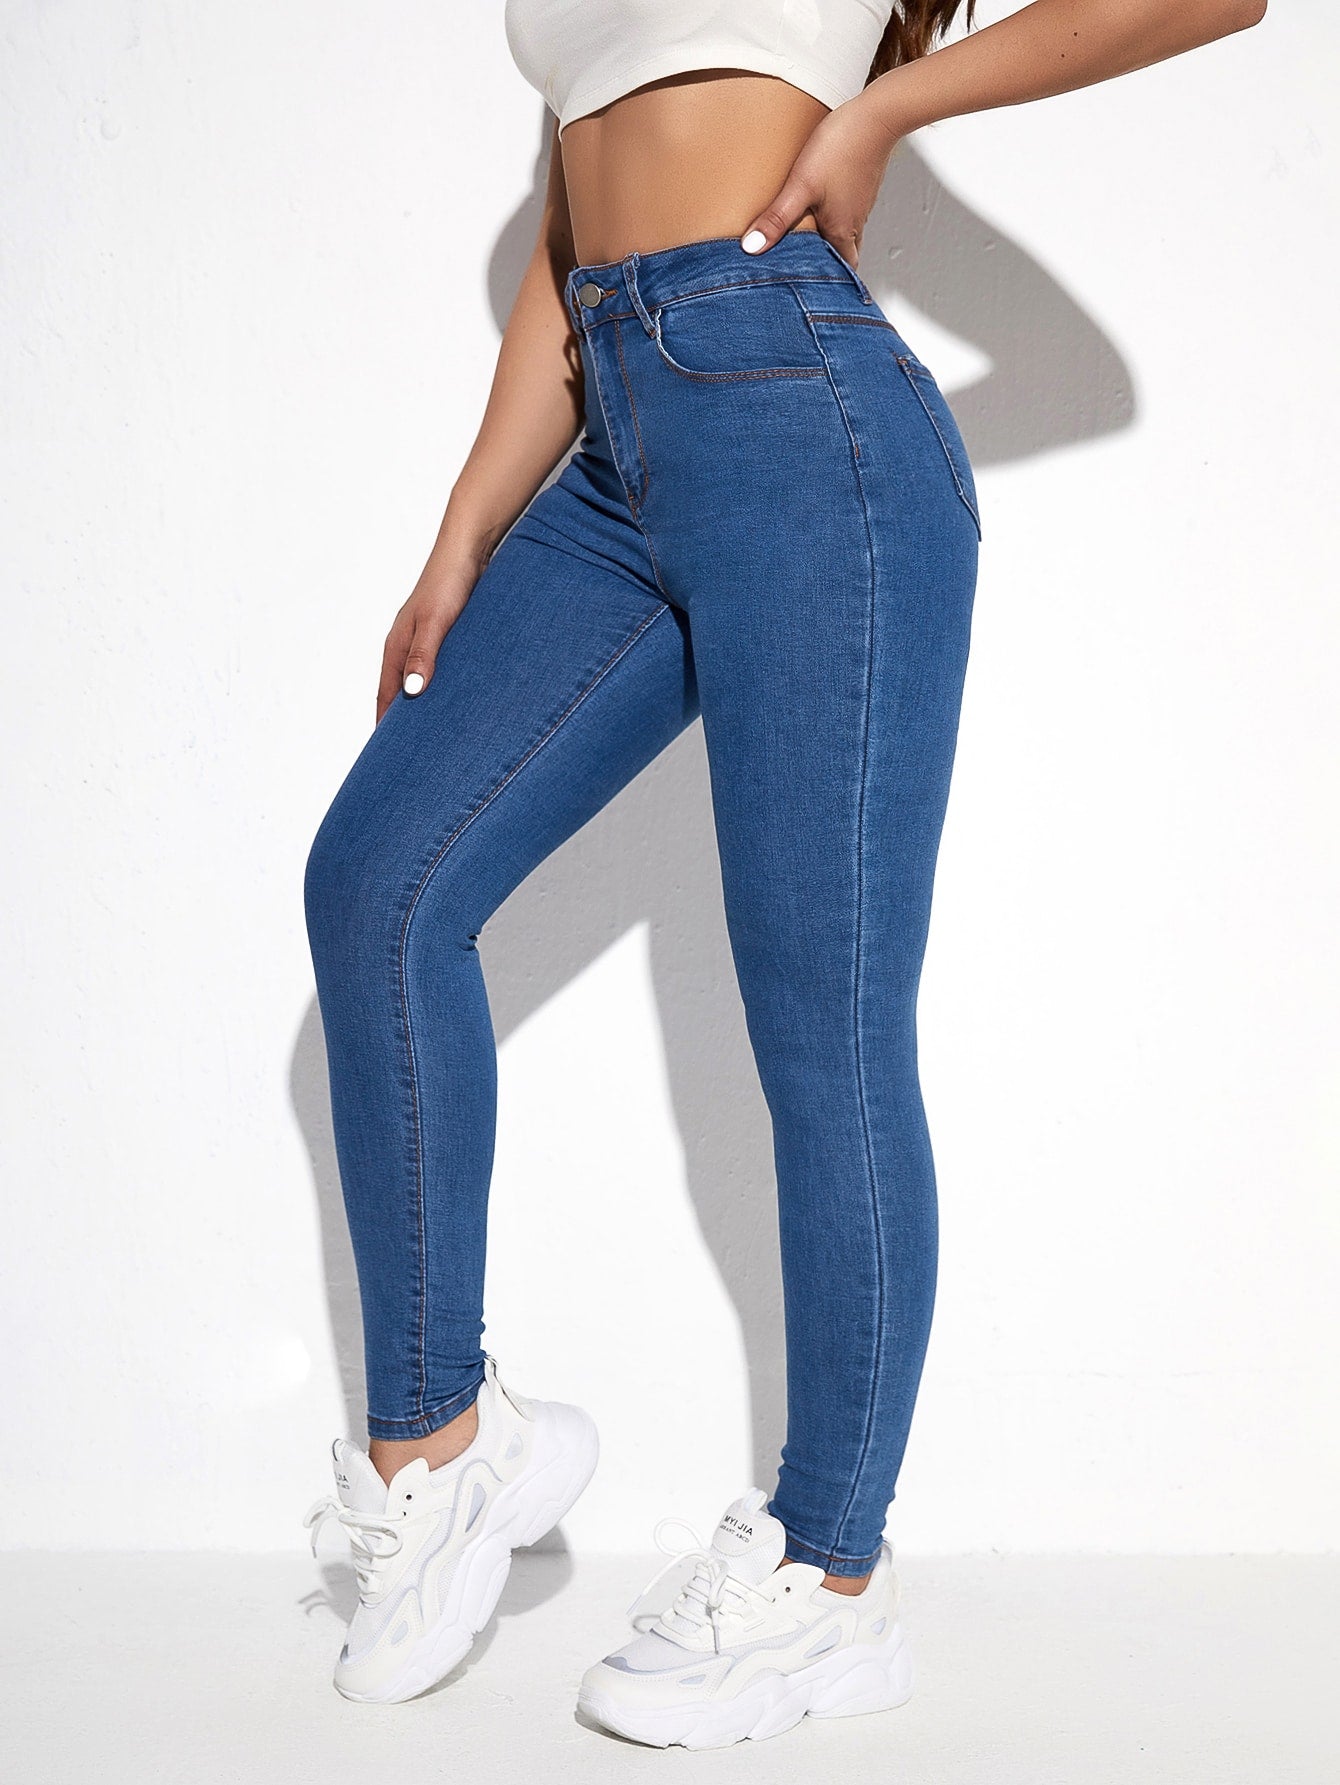 High Waist Skinny Cropped Jeans